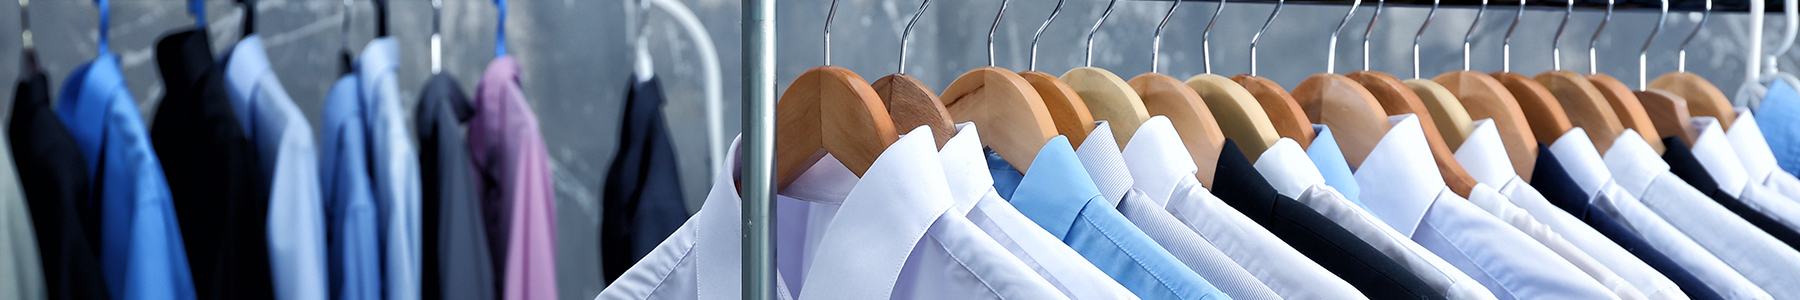 Dry cleaned dress shirts